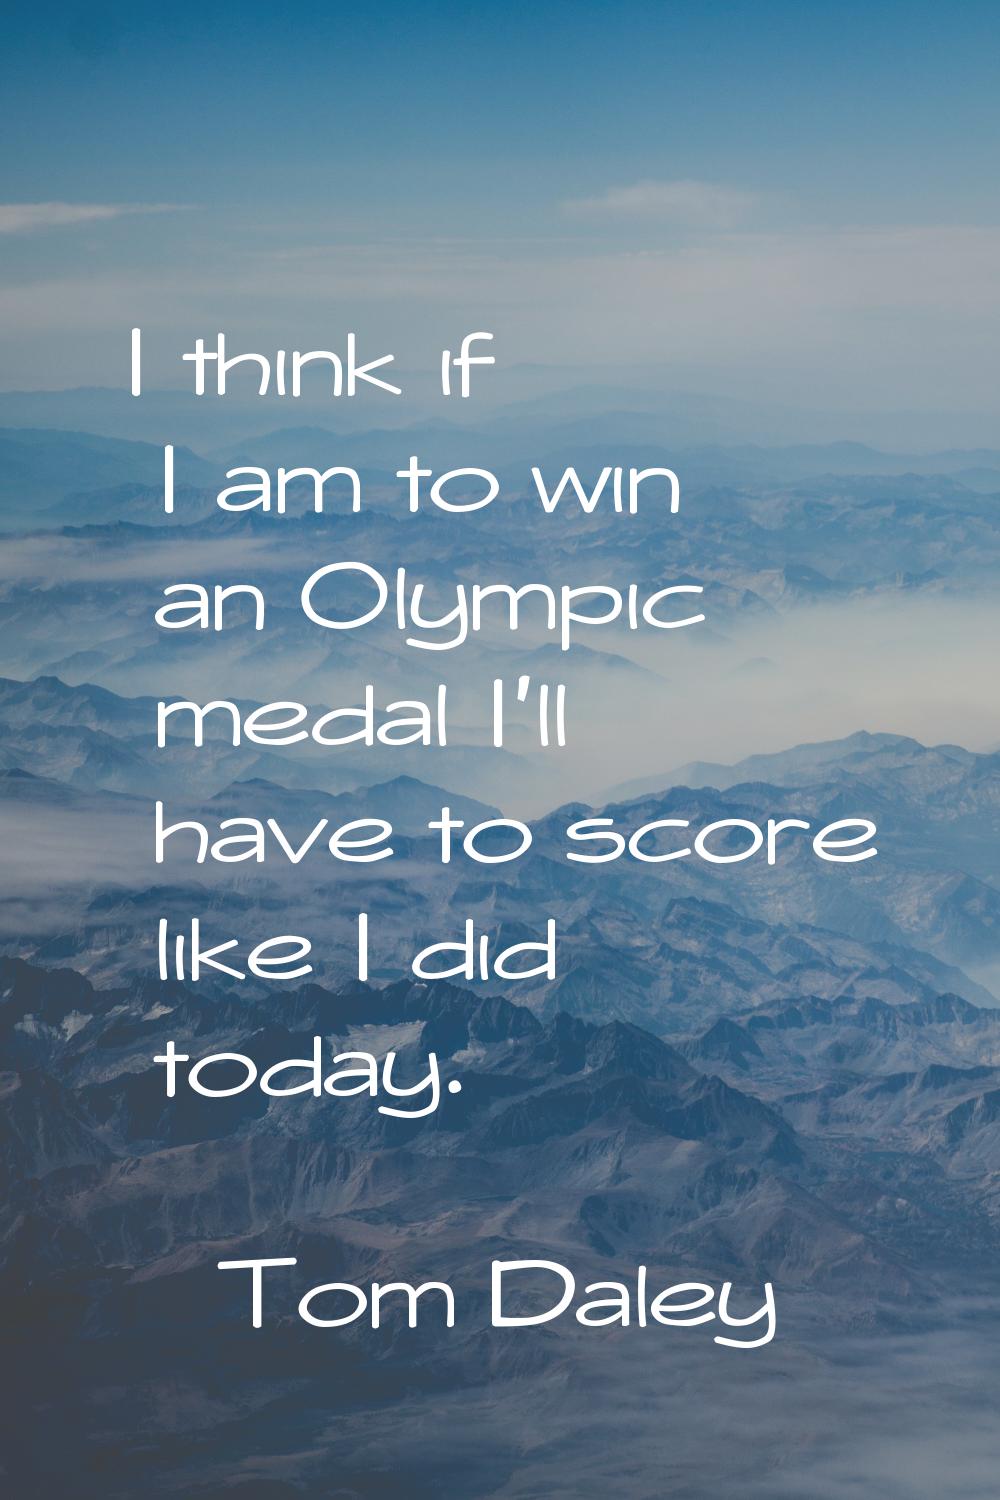 I think if I am to win an Olympic medal I'll have to score like I did today.